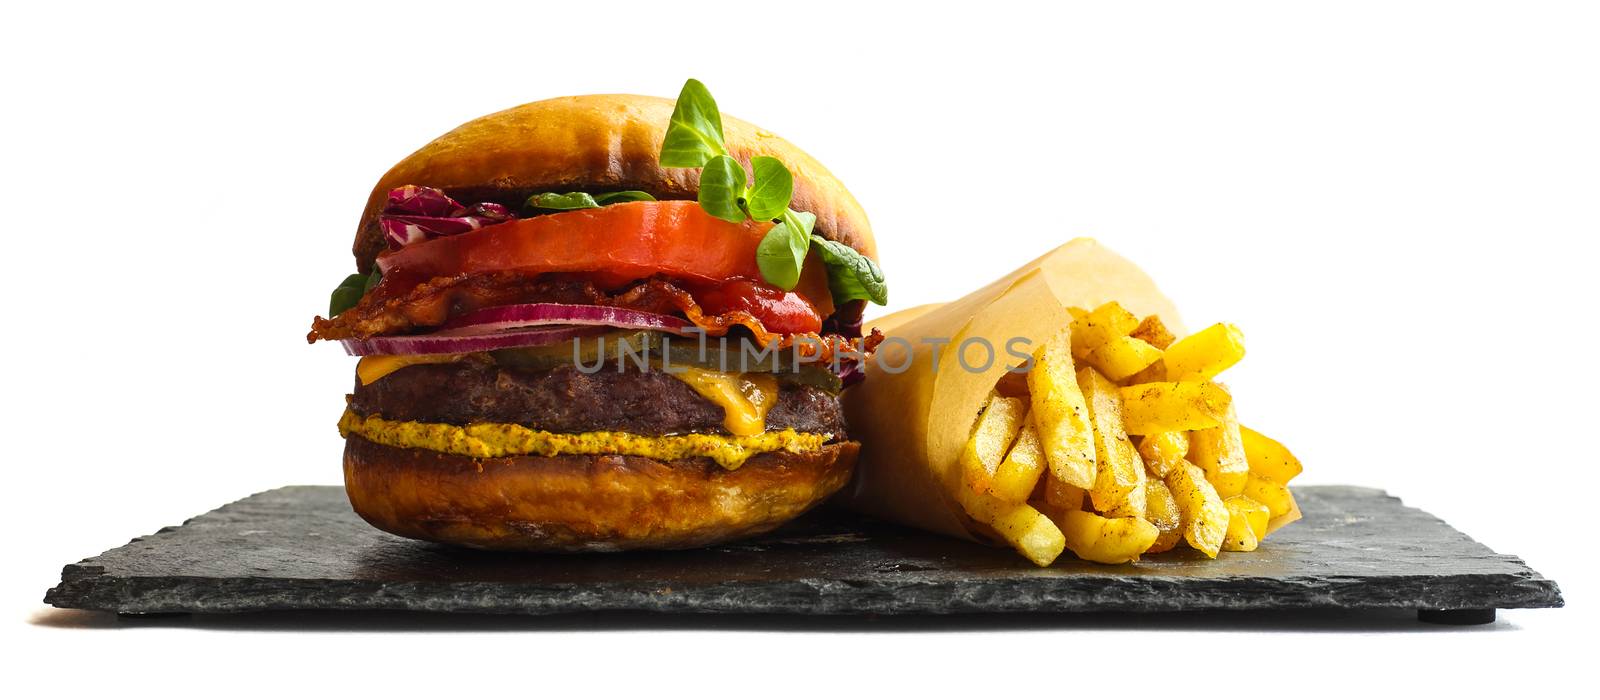 Big fresh burger and french fries isolated on white background